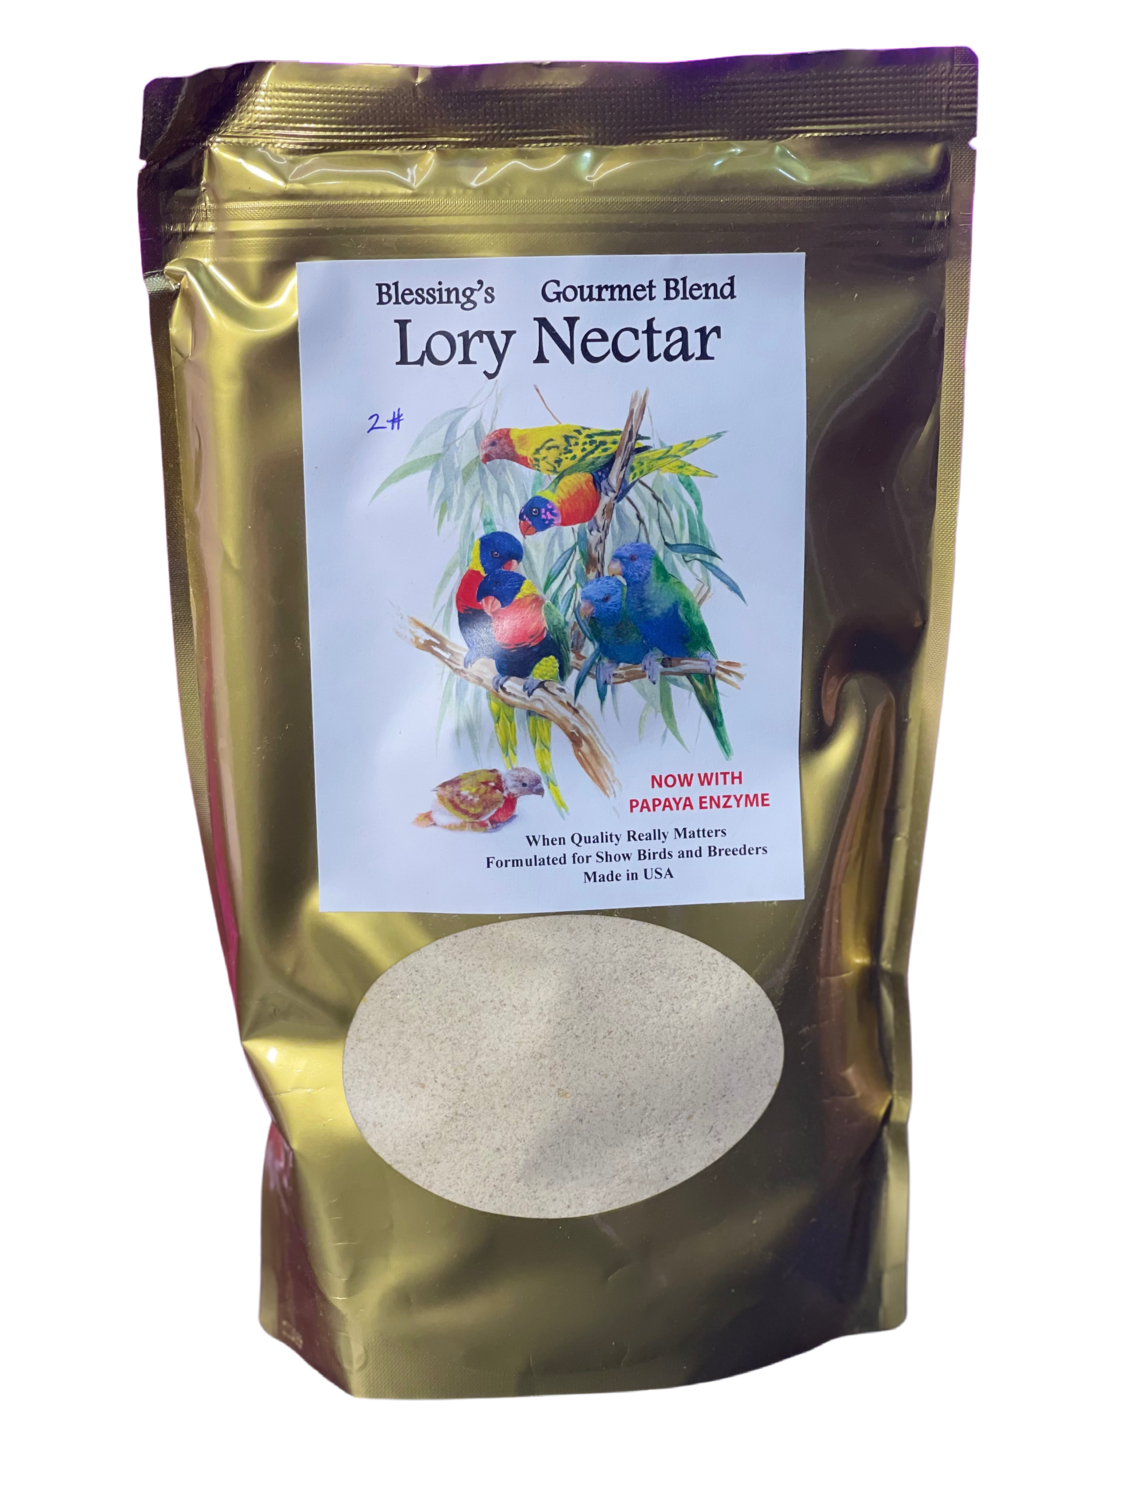 2 Lb Gourmet Blend Lory Nectar by Blessings